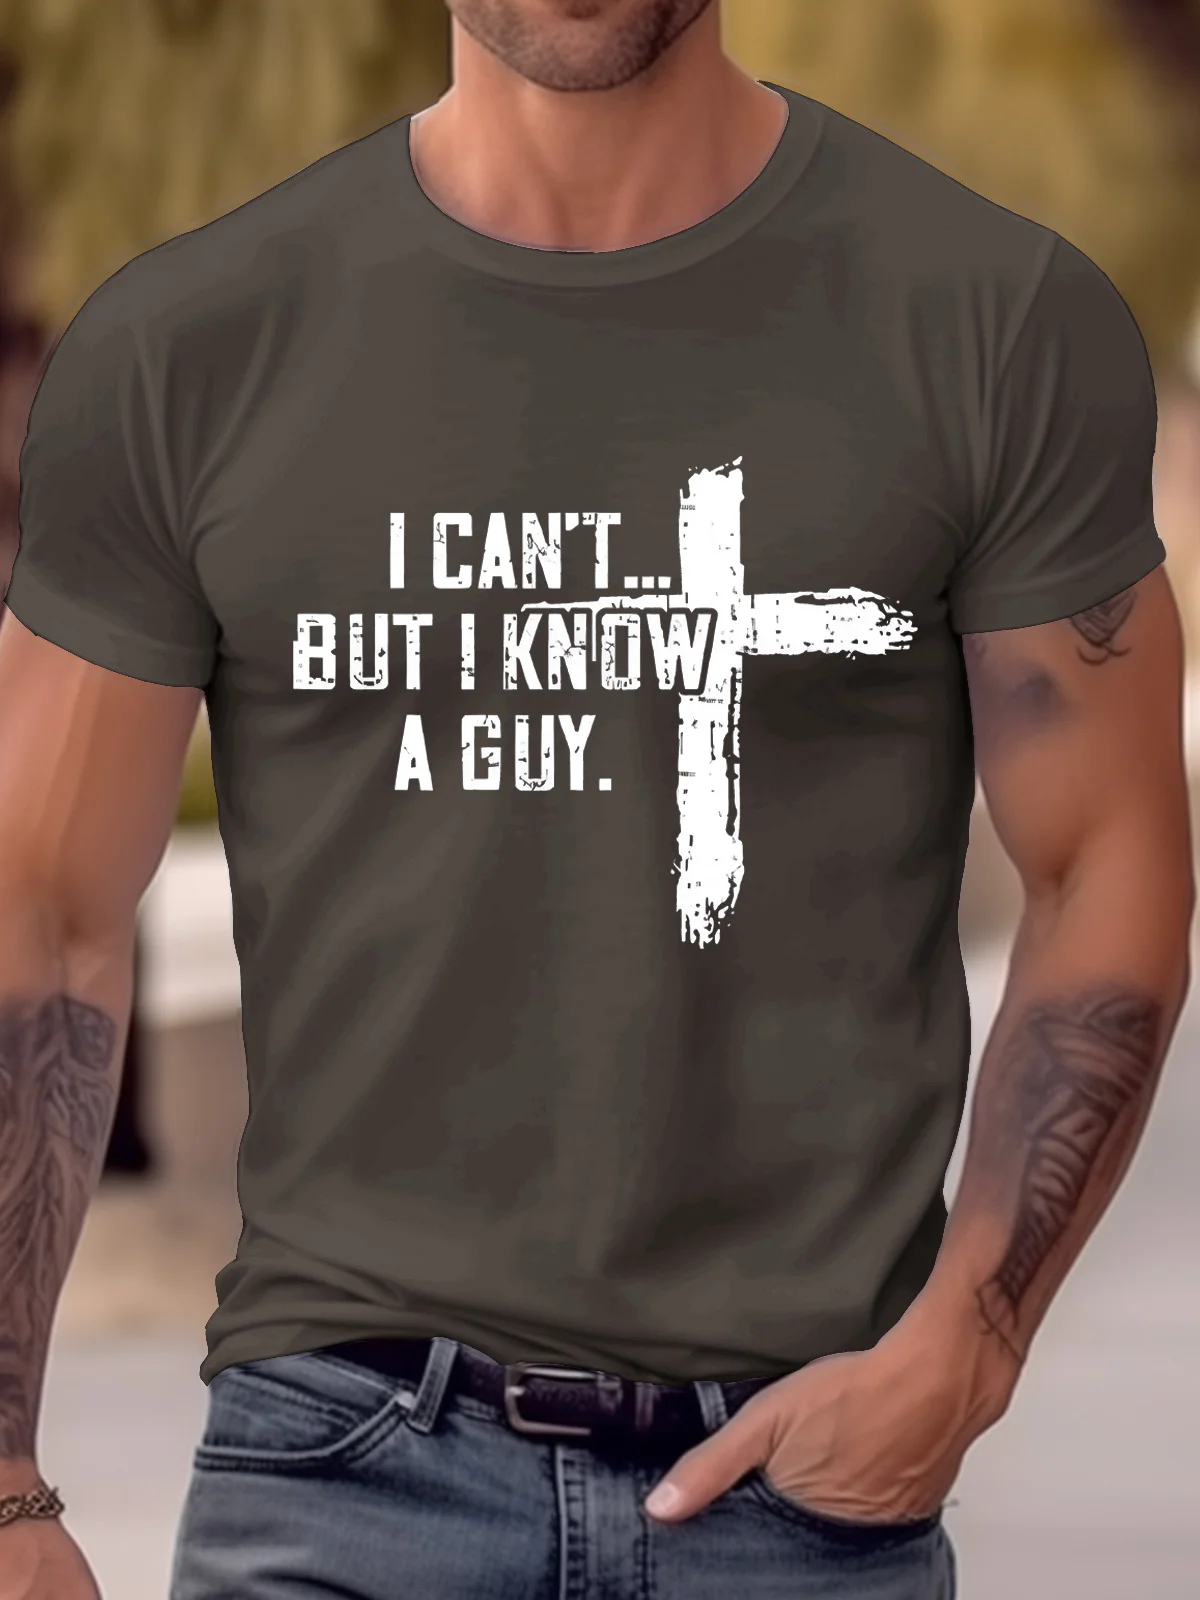 Royaura® I Can't But I Know A Guy Men's Round Neck T-Shirt Faith Cross Stretch Top Big Tall